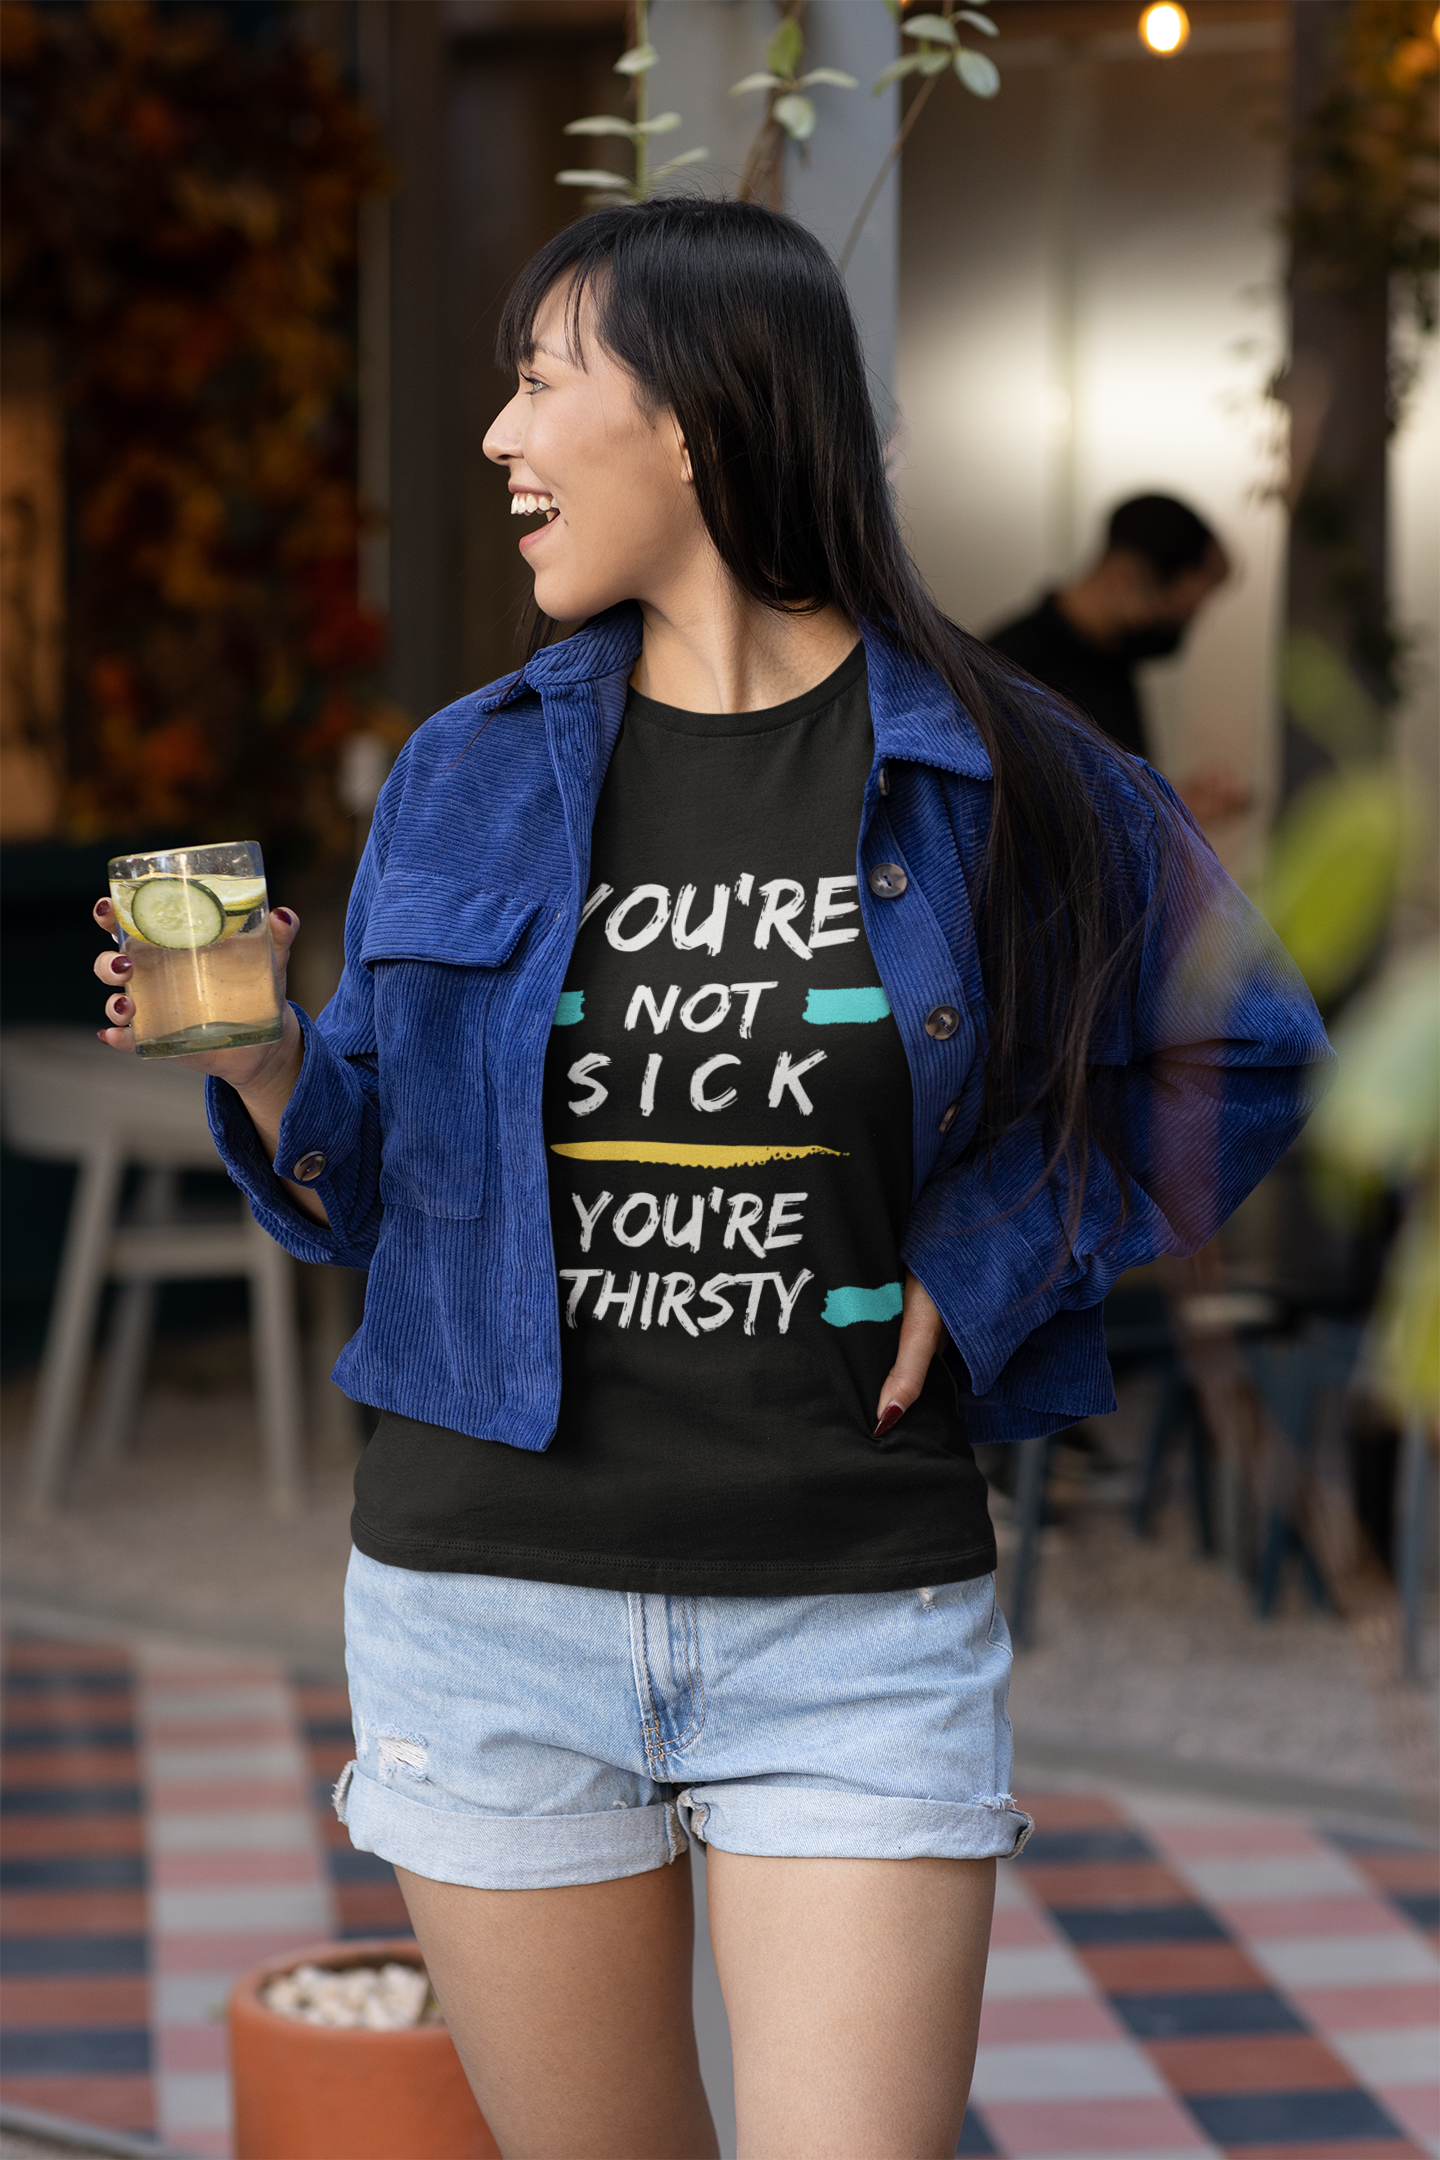 Short-Sleeve Unisex "You're Not Sick, You're Thirsty" T-Shirt